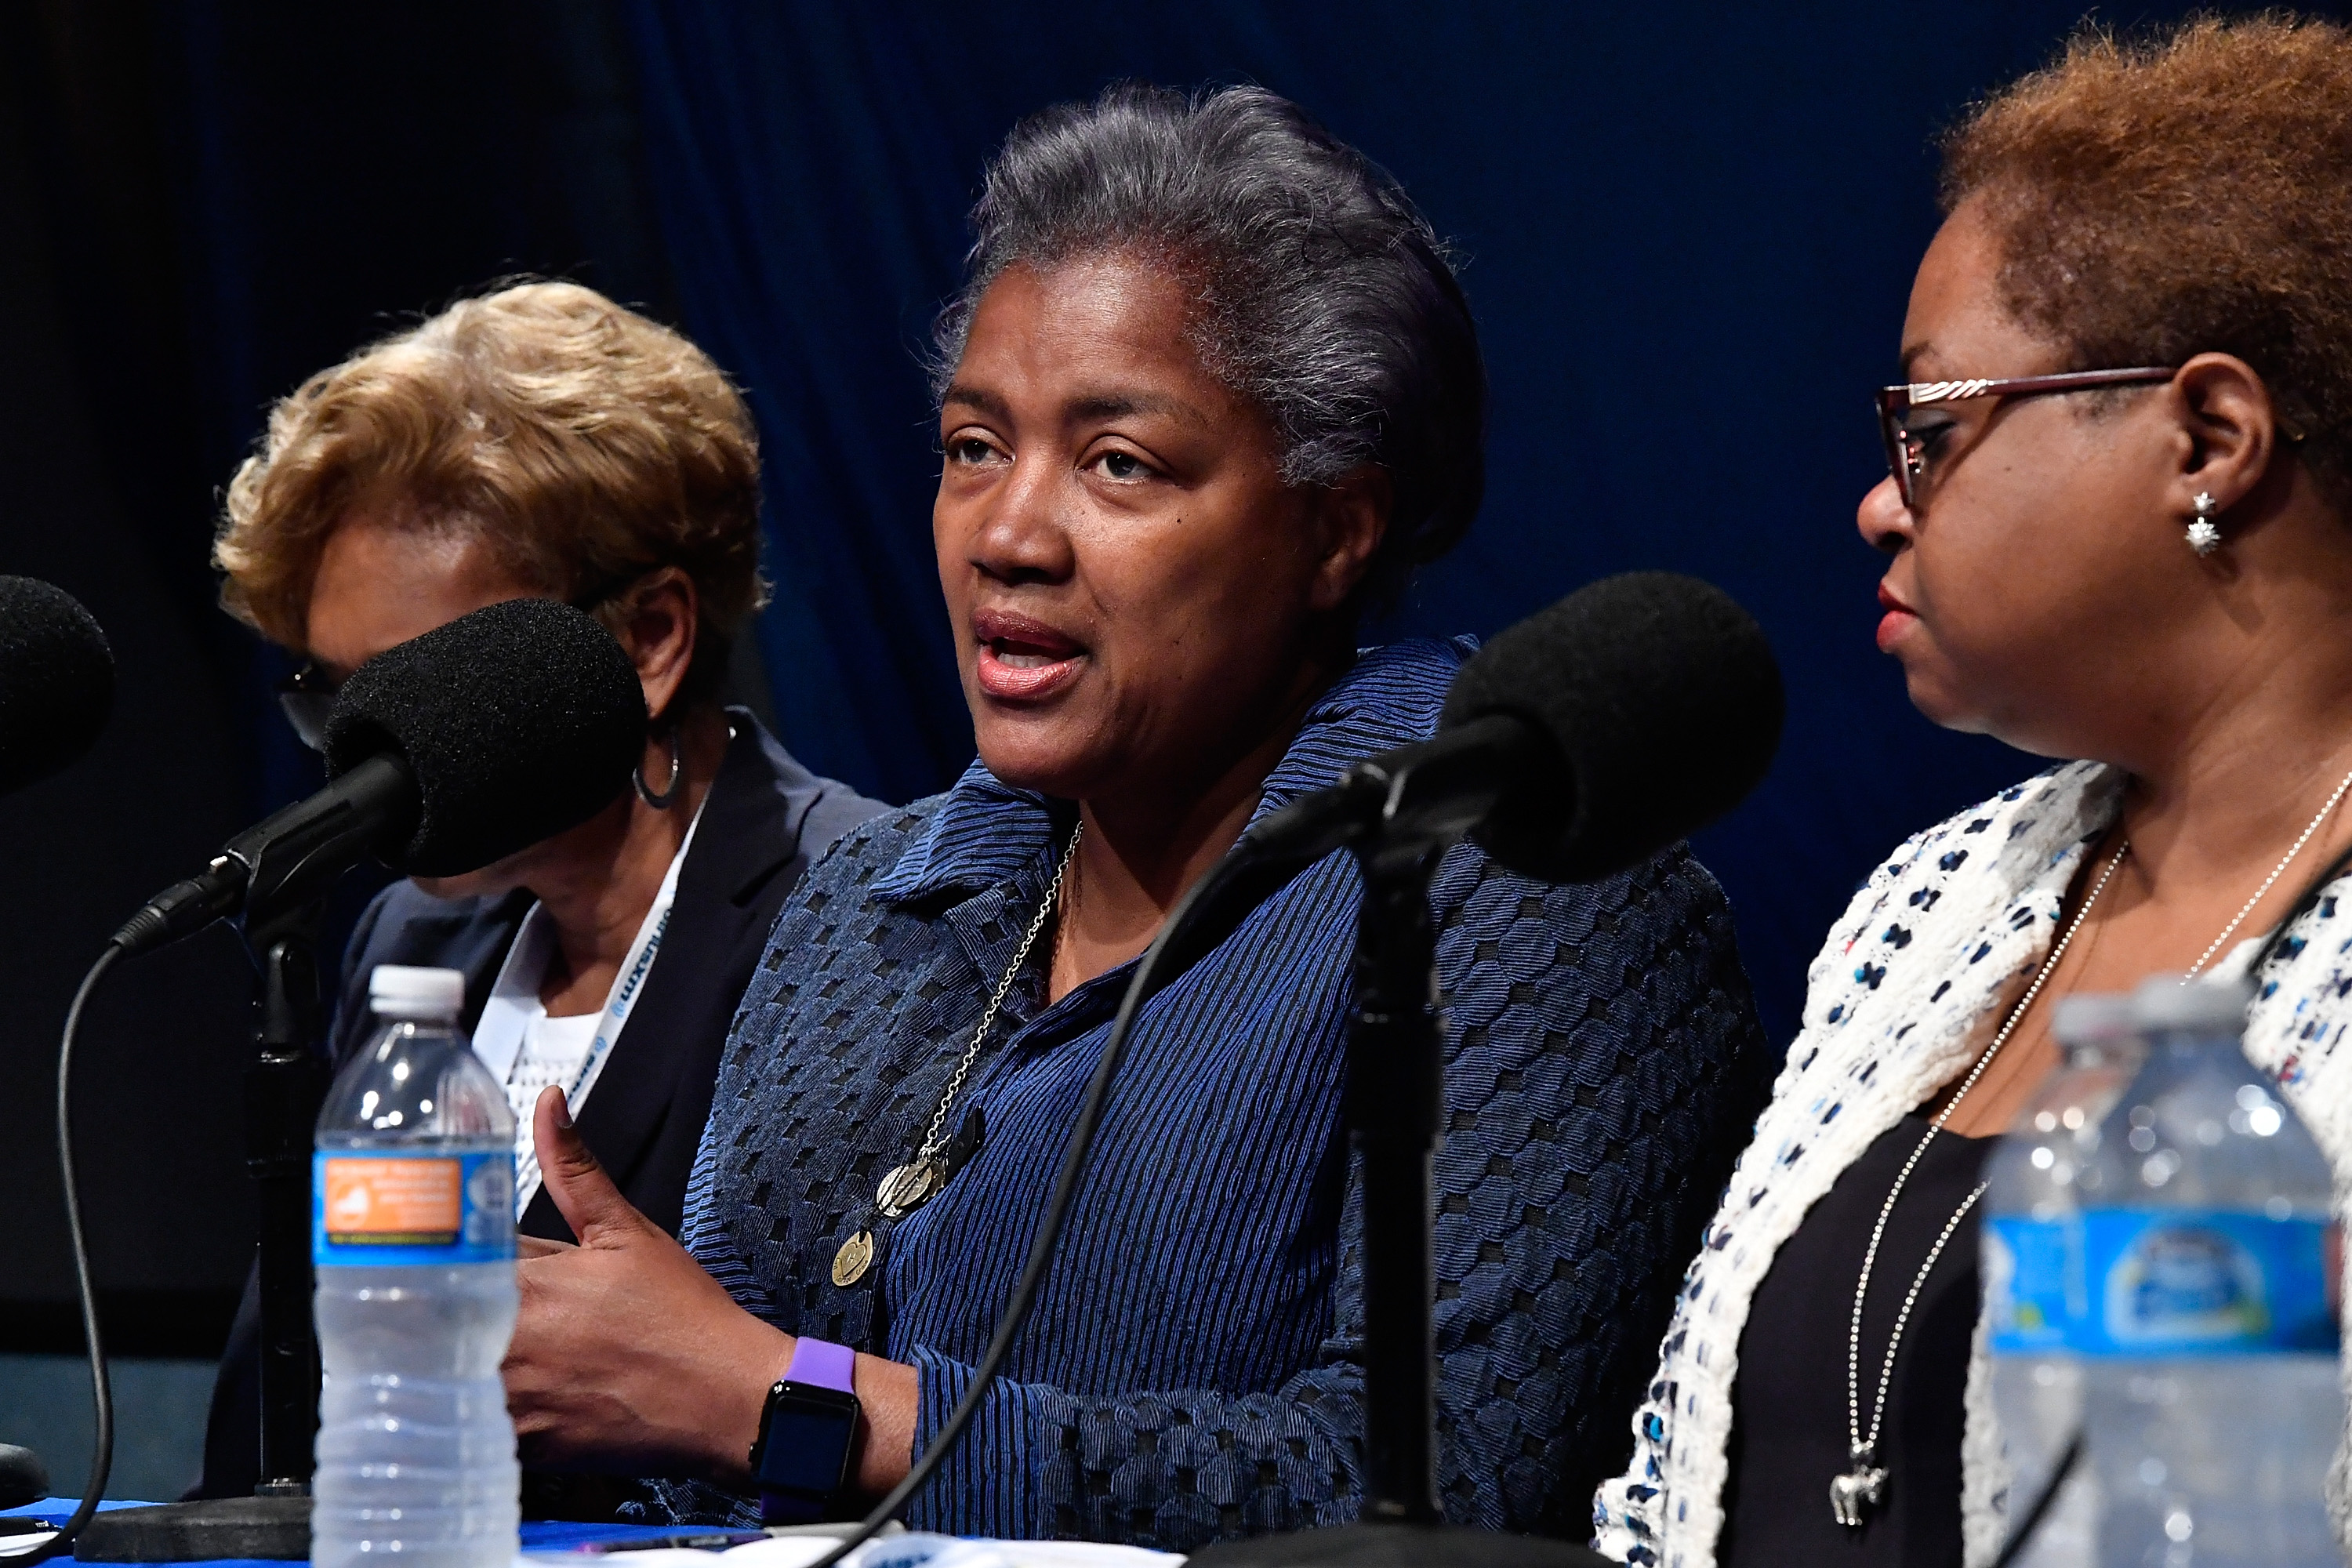 SiriusXM's Progress Channel Presents: For Colored Girls Who Have Considered Politics, A Women's History Month Panel Featuring Donna Brazile, Minyon Moore, Leah Daughtry & Yolanda Caraway